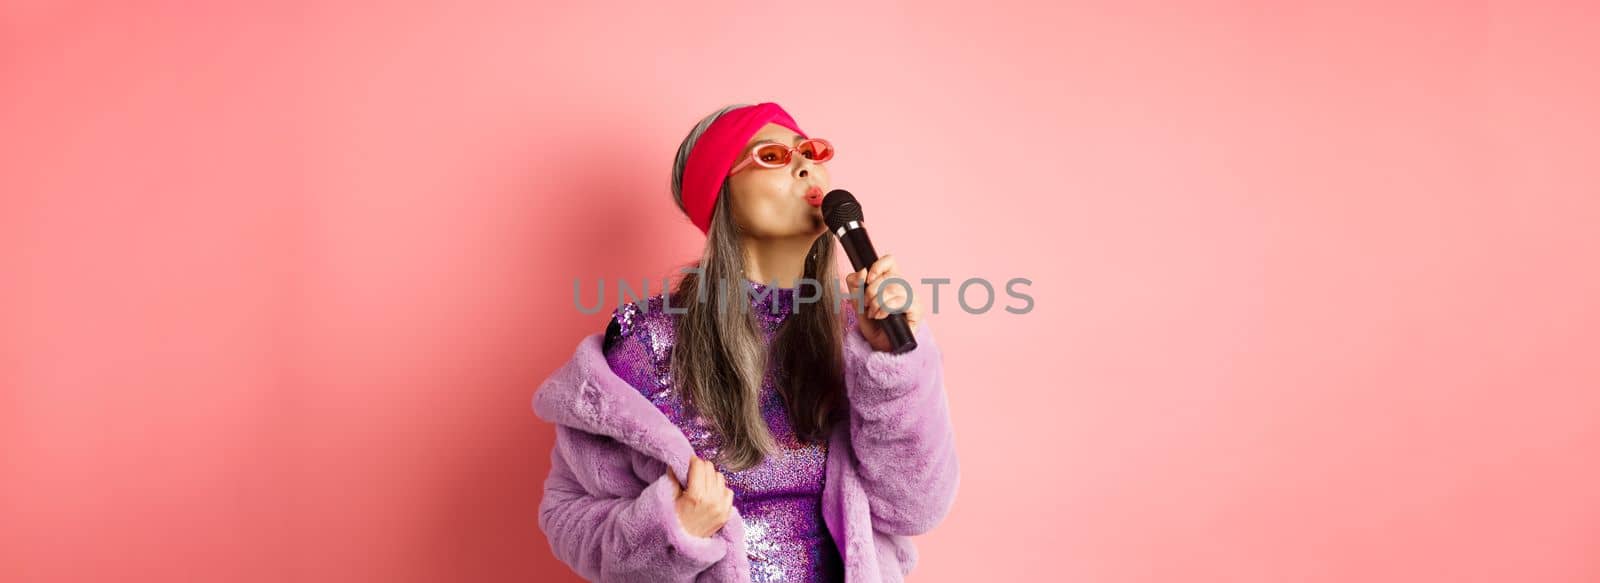 Stylish asian senior woman singing song, performing karaoke with microphone, standing in party outfit and faux fur coat against pink background.